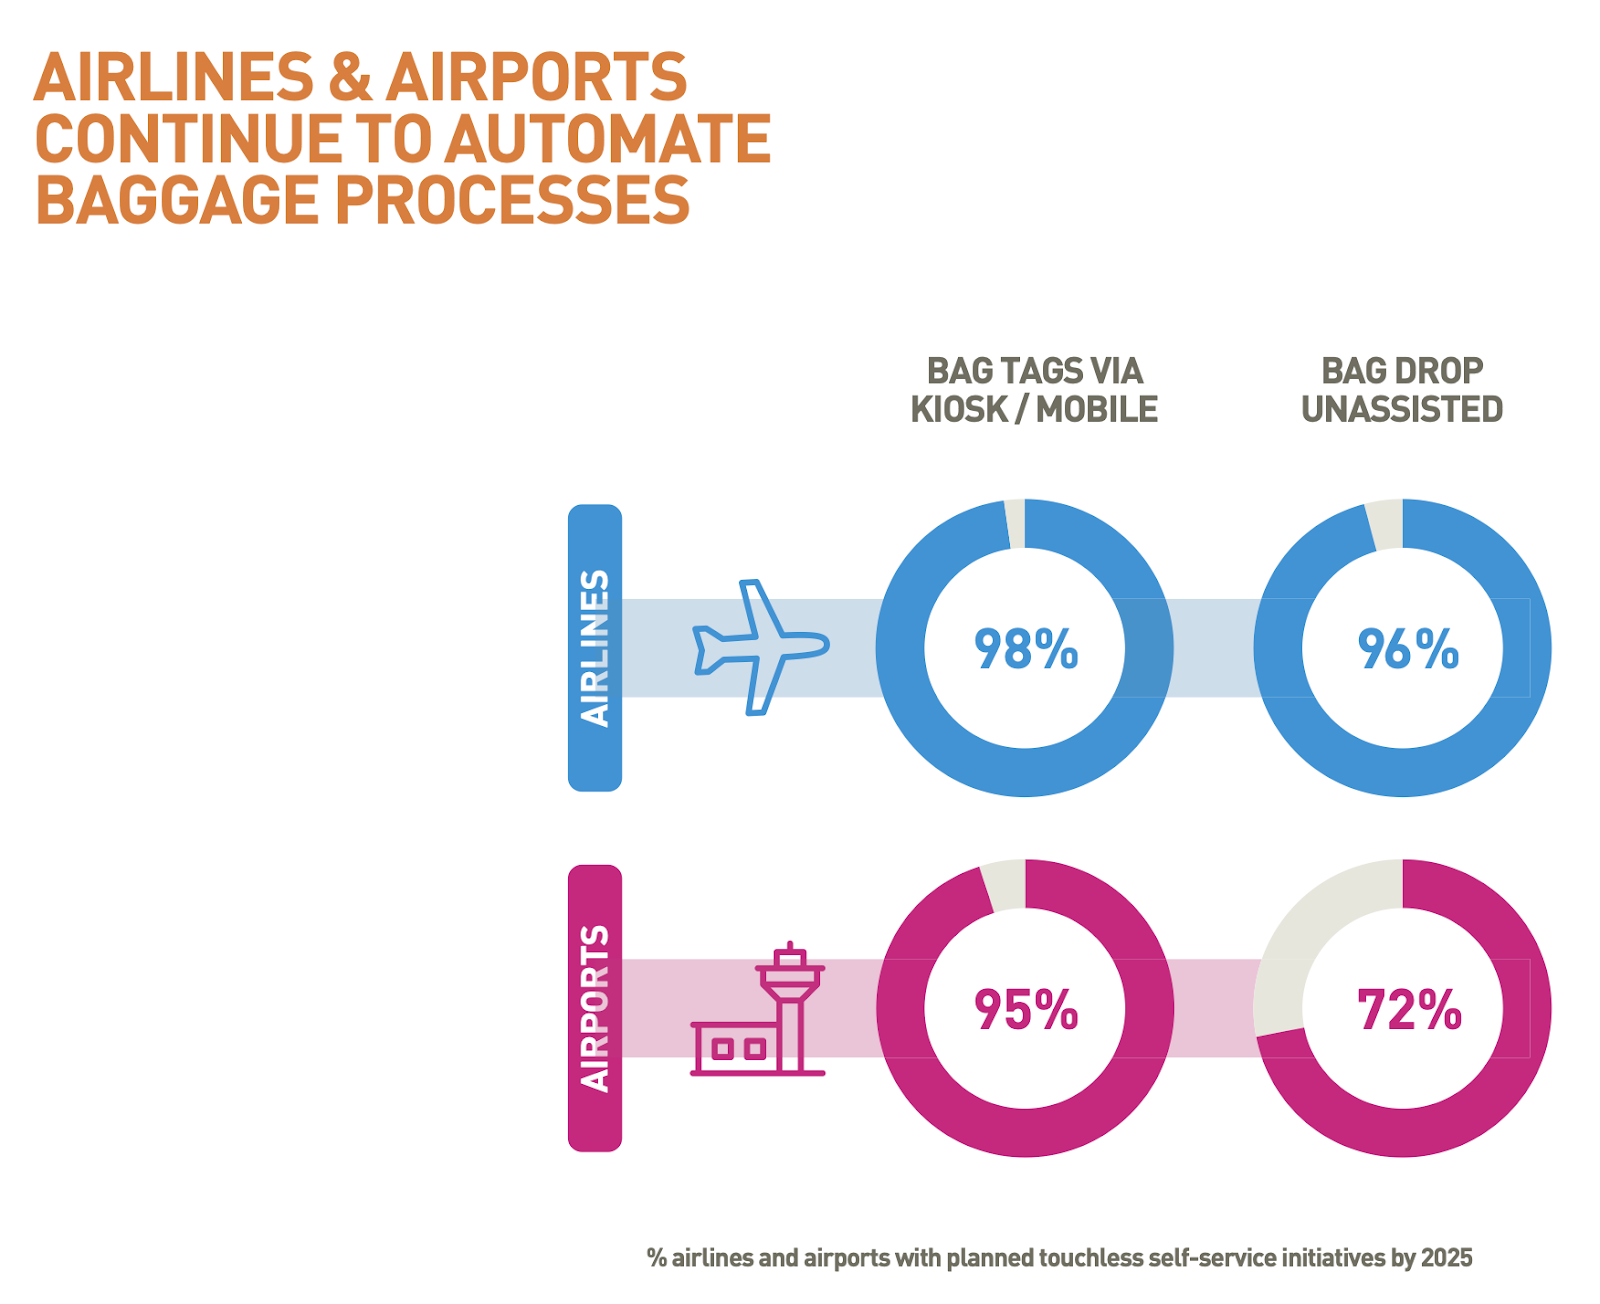 SITA graph airlines and airports continue to automate baggage process. Illustrates 98% of airlines have plans to adopt bag tags via kiosk or mobile and 96% plan to adopt unassisted bag drop by 2025. 95% of airports plan to adopt bag tags via kiosk/mobile and 72% plan to adopt unassisted bag drop by 2025. 